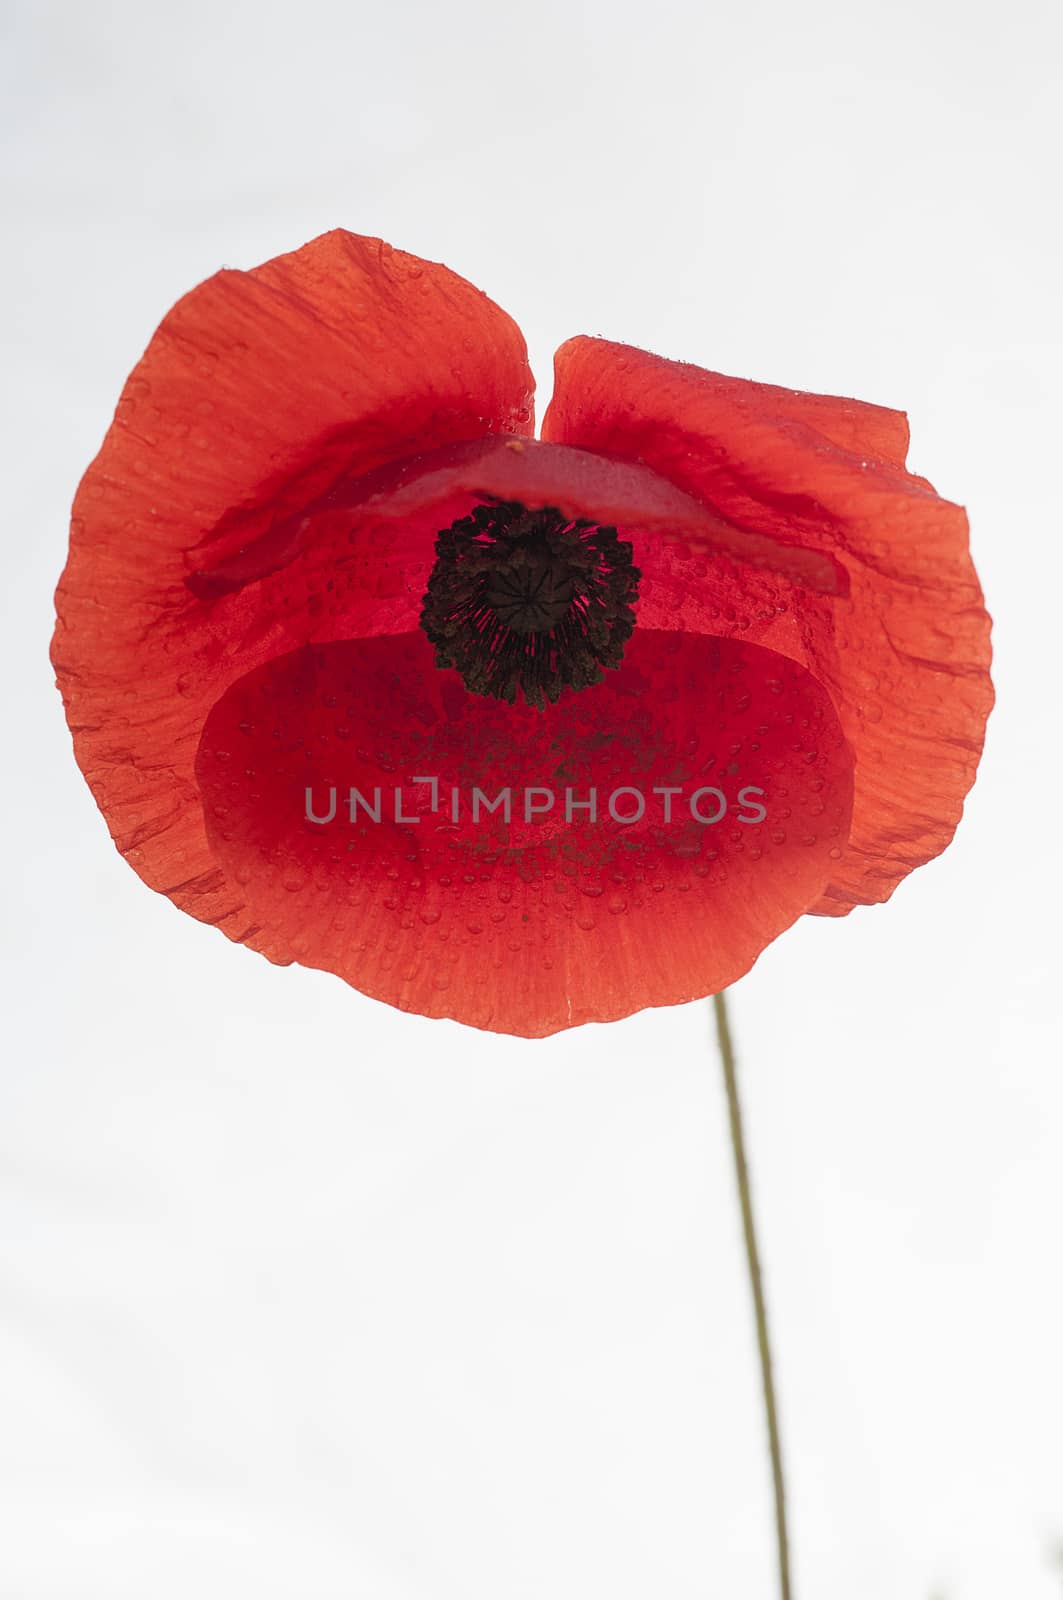 Red poppy flower with white background (Papaver rhoeas)  by jalonsohu@gmail.com